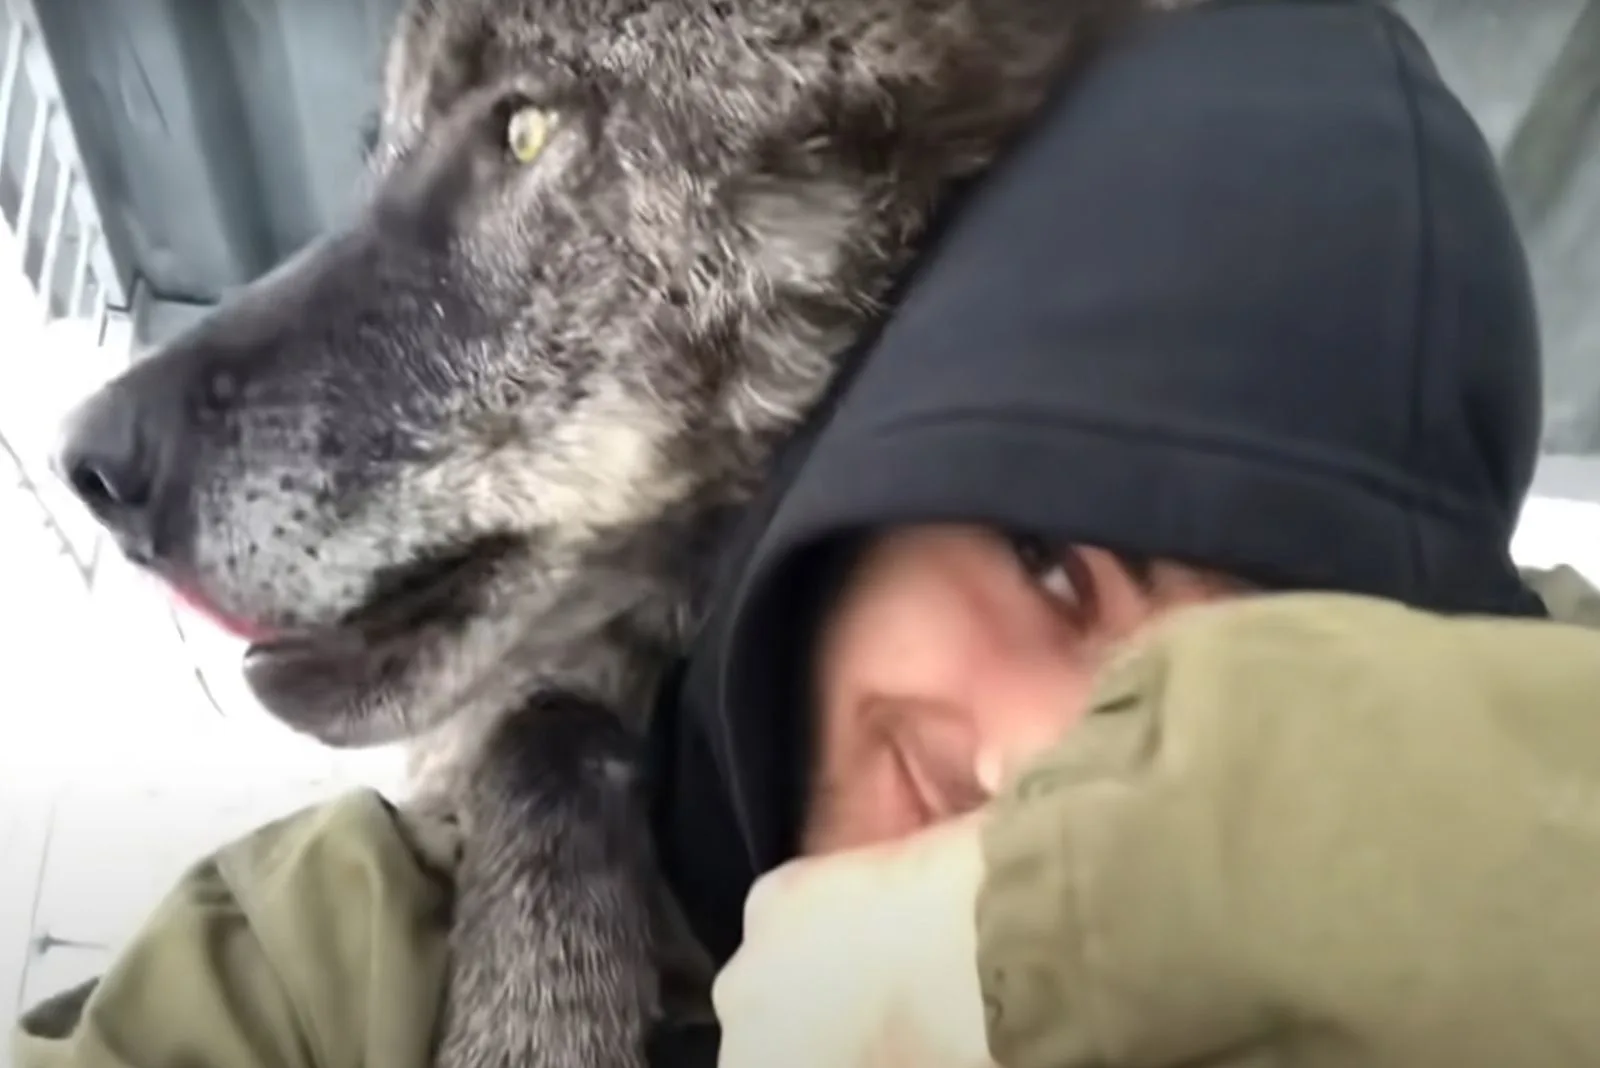 wolf hugging a man while playing with him